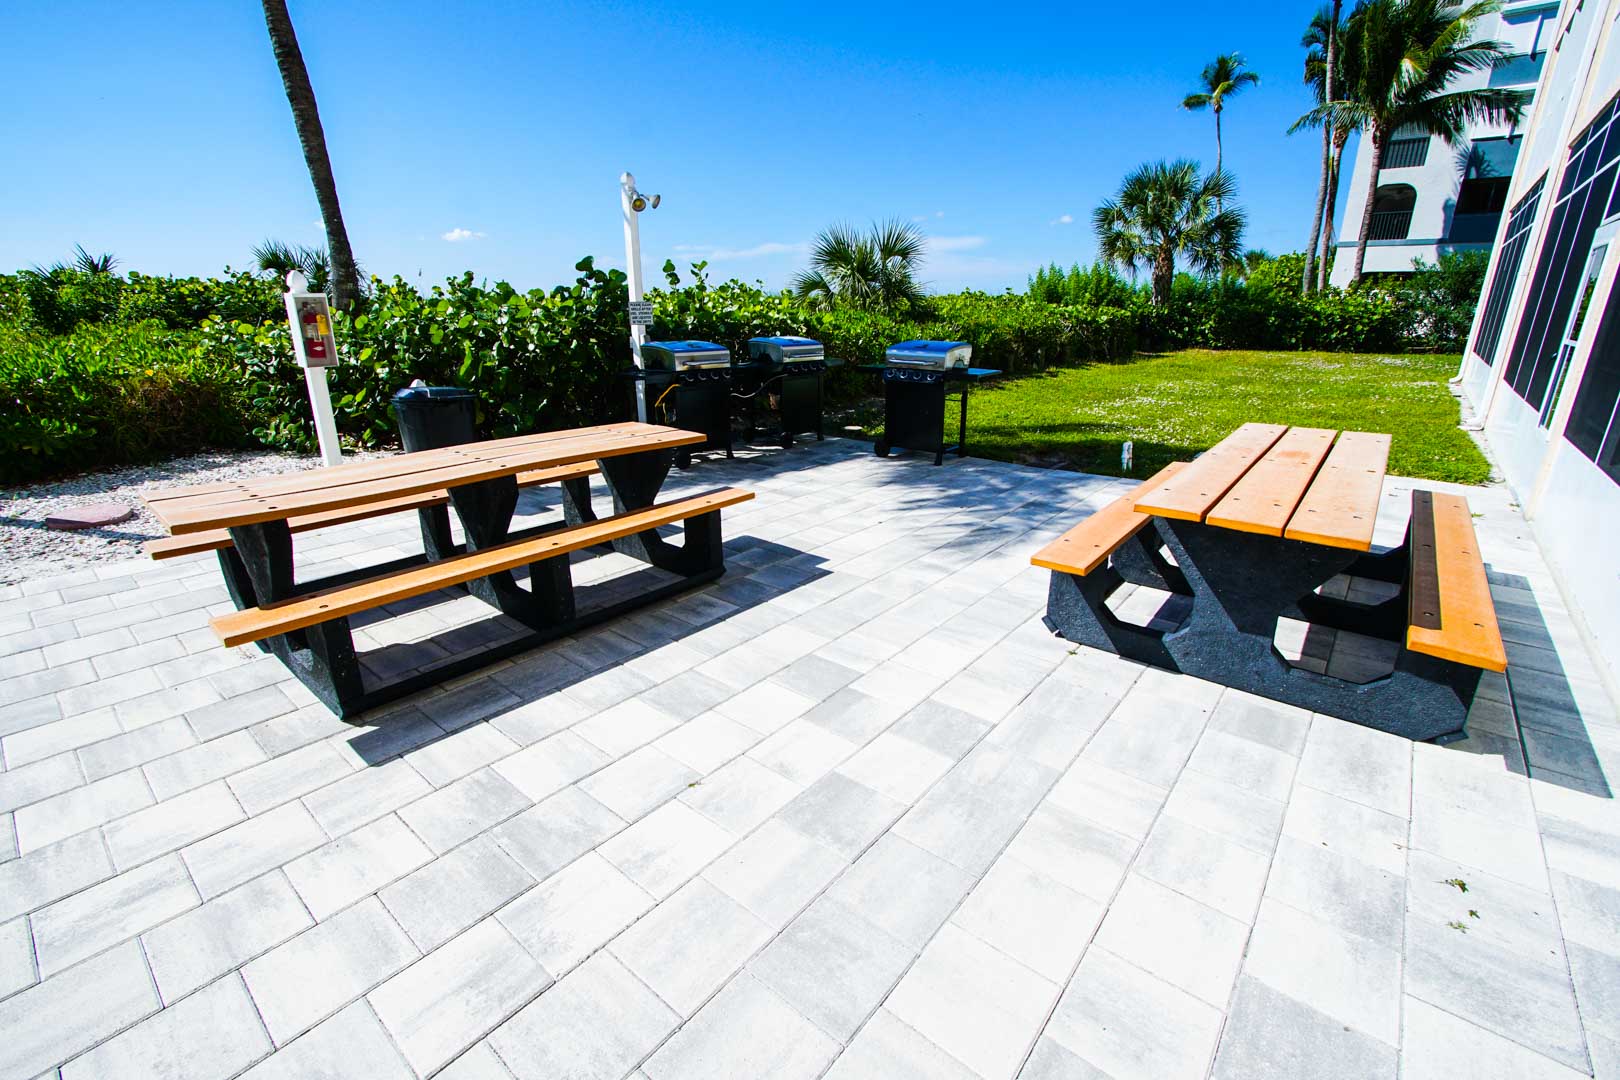 BBQ grills by the beach at VRI's Windward Passage Resort in Fort Myers Beach, Florida.